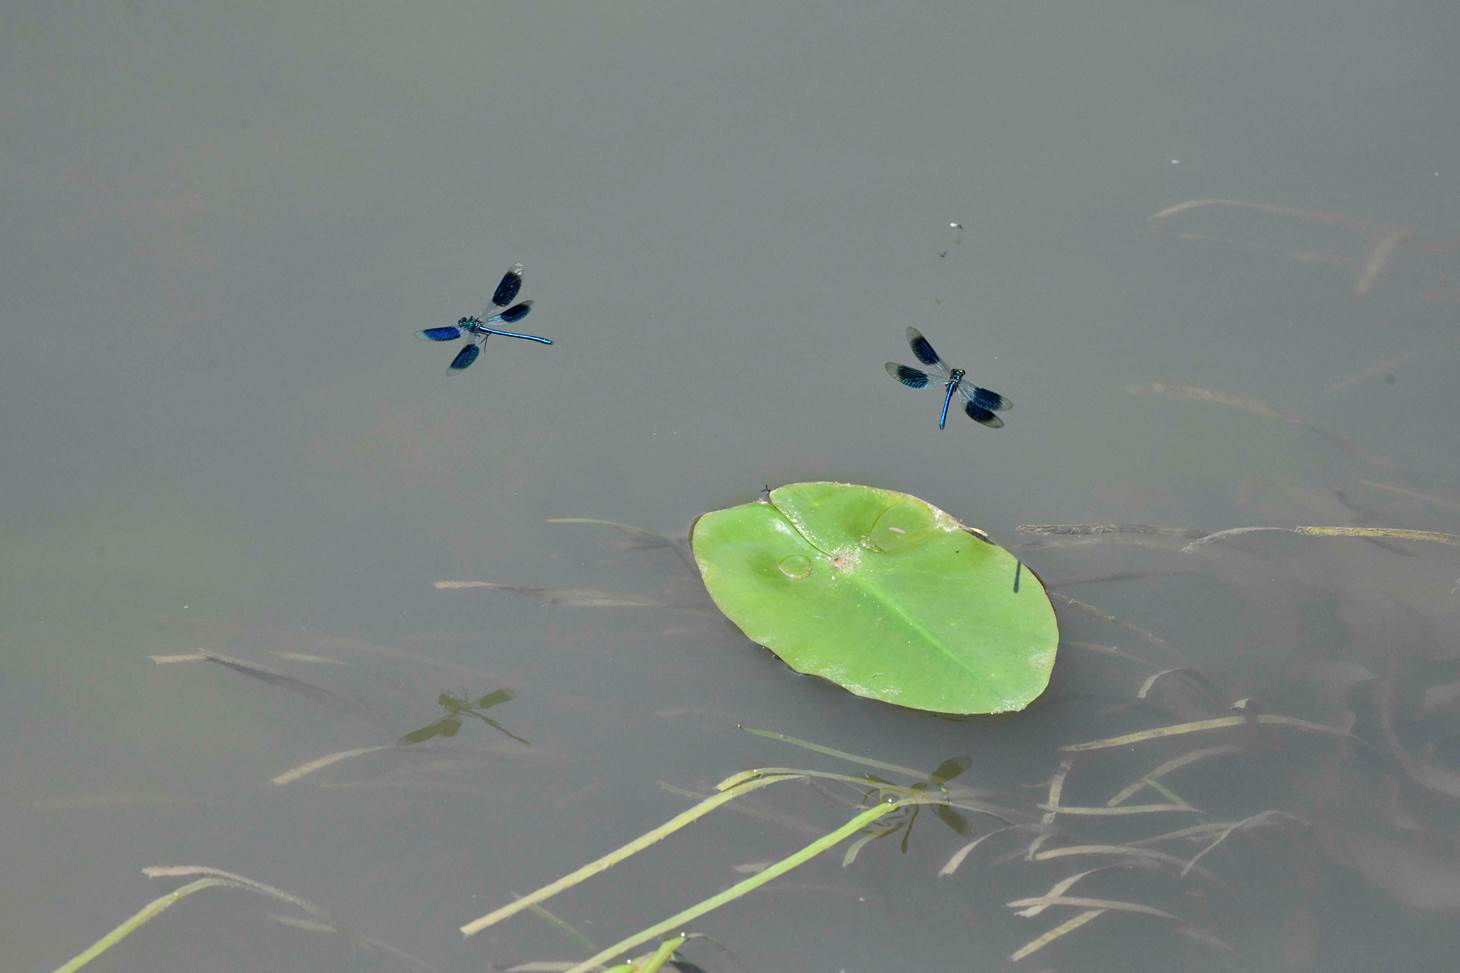 A green leaf in water with dragonflies

Description automatically generated